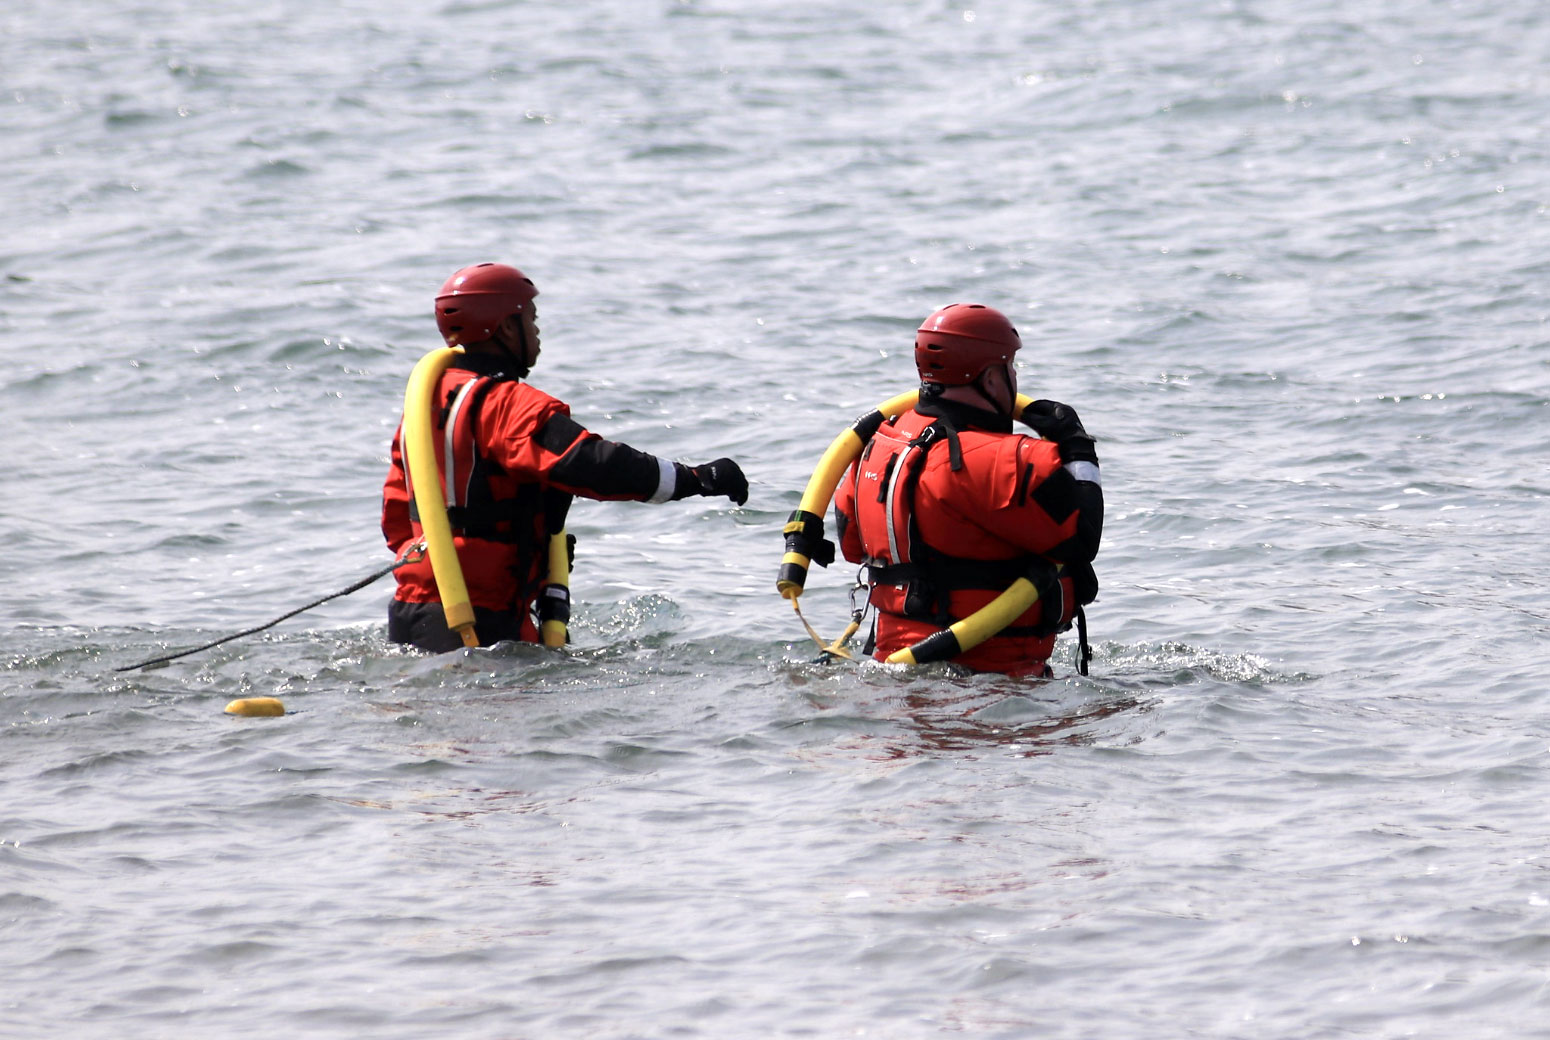 Two men in red wetsuits in the water with rescue ropes.